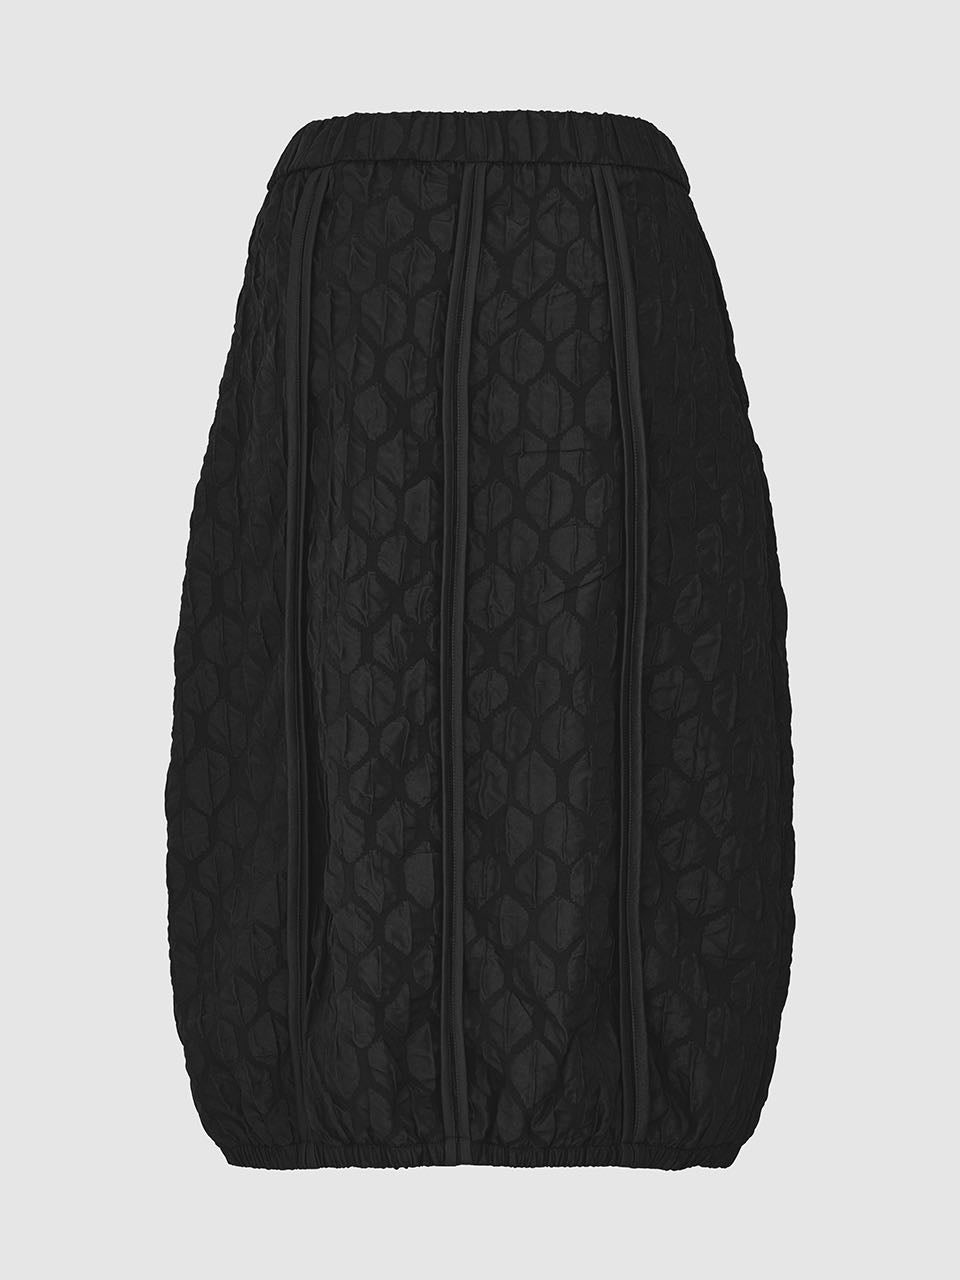 Ever Sassy Skirt "Living In A Bubble" 13157 - Black